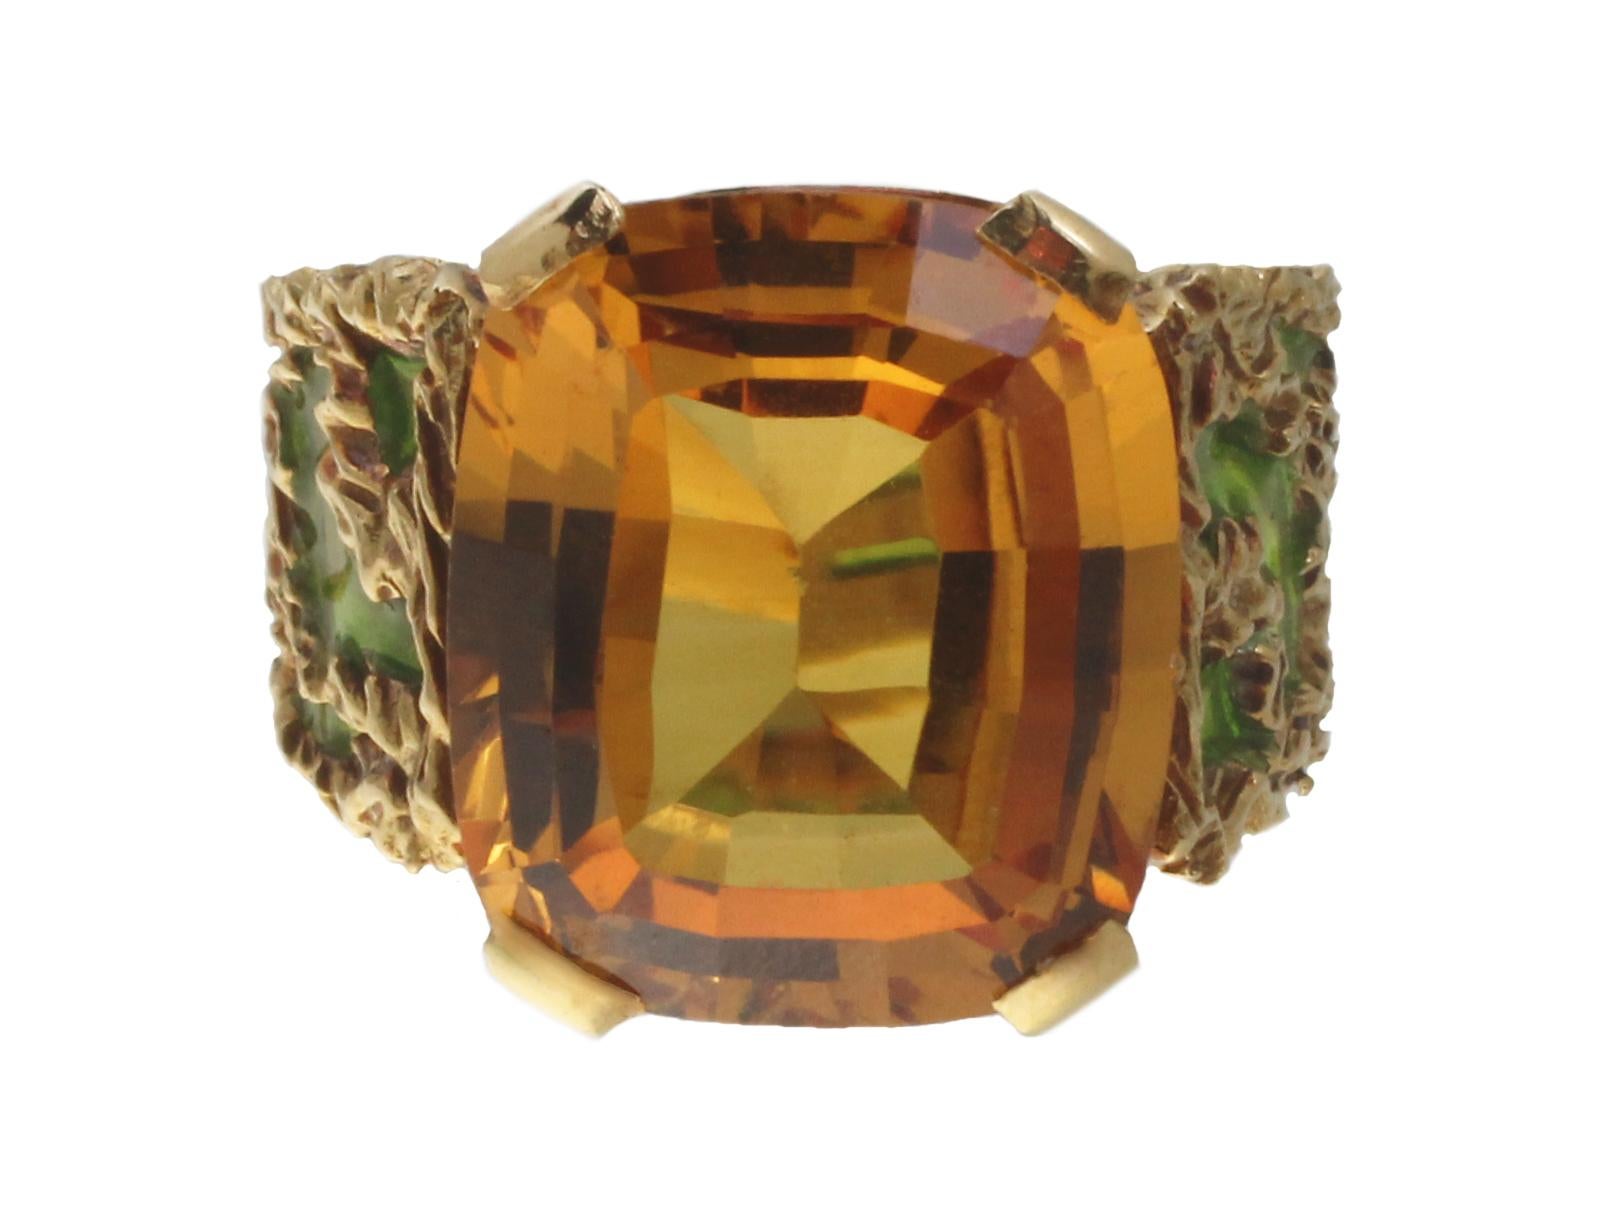 One of a kind green Plique-à-jour ring in 18 K yellow gold set with a yellow topaz as center stone. Handmade in Europe at the designer’s workshop. Inspired by the importance and richness of the Olive-tree in Mediterranean culture this ring depicts